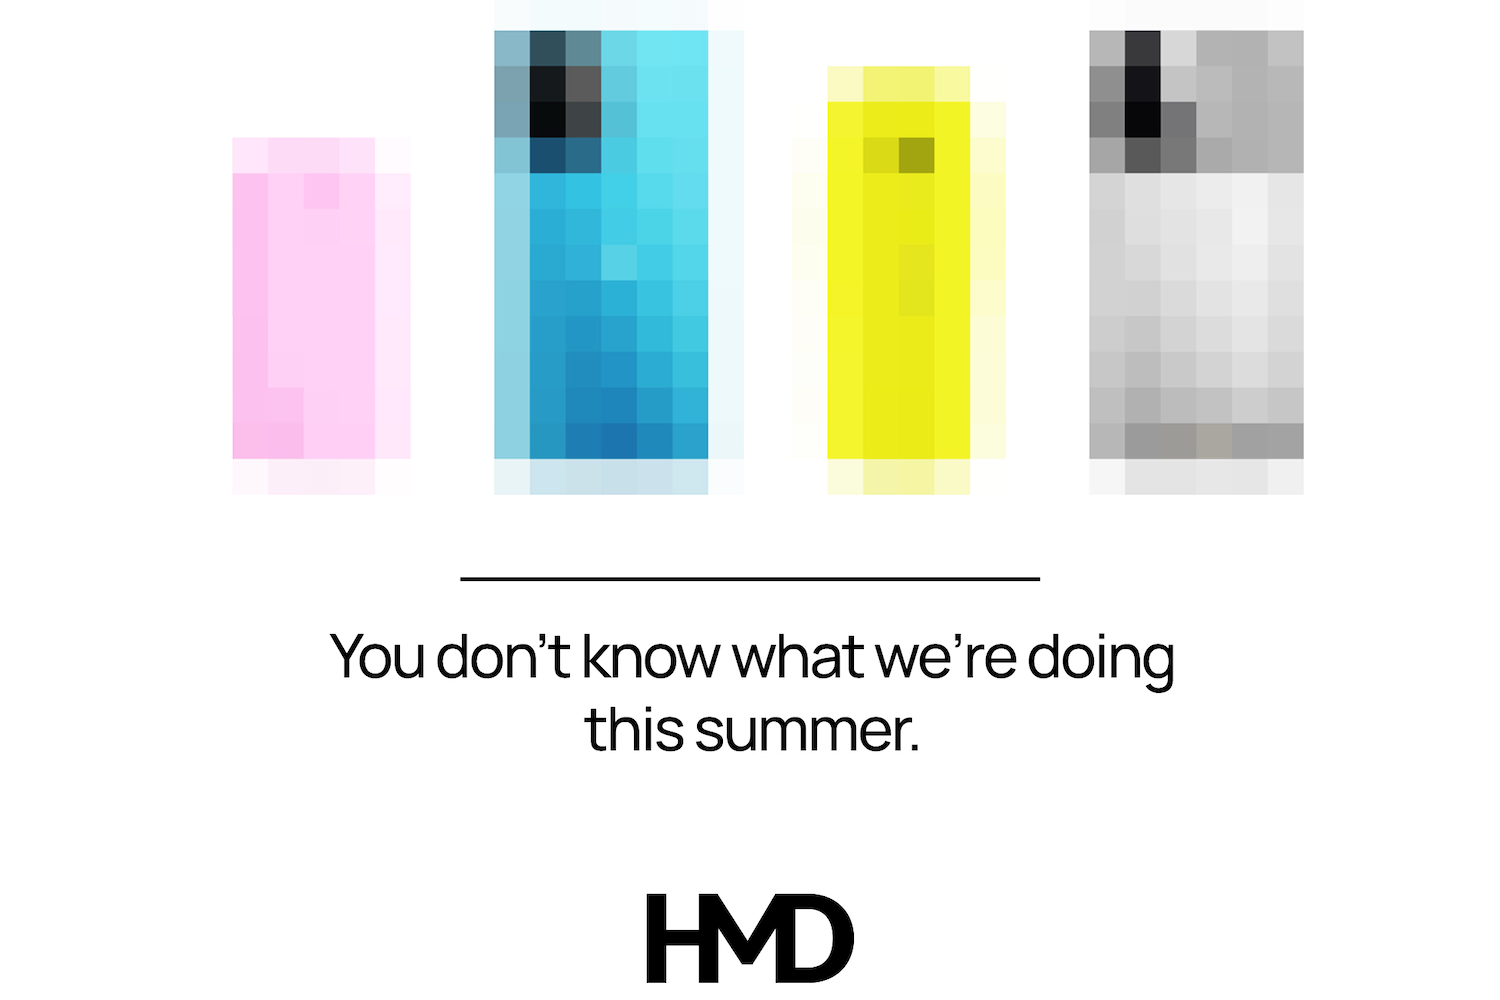 Teaser of Upcoming HMD Devices